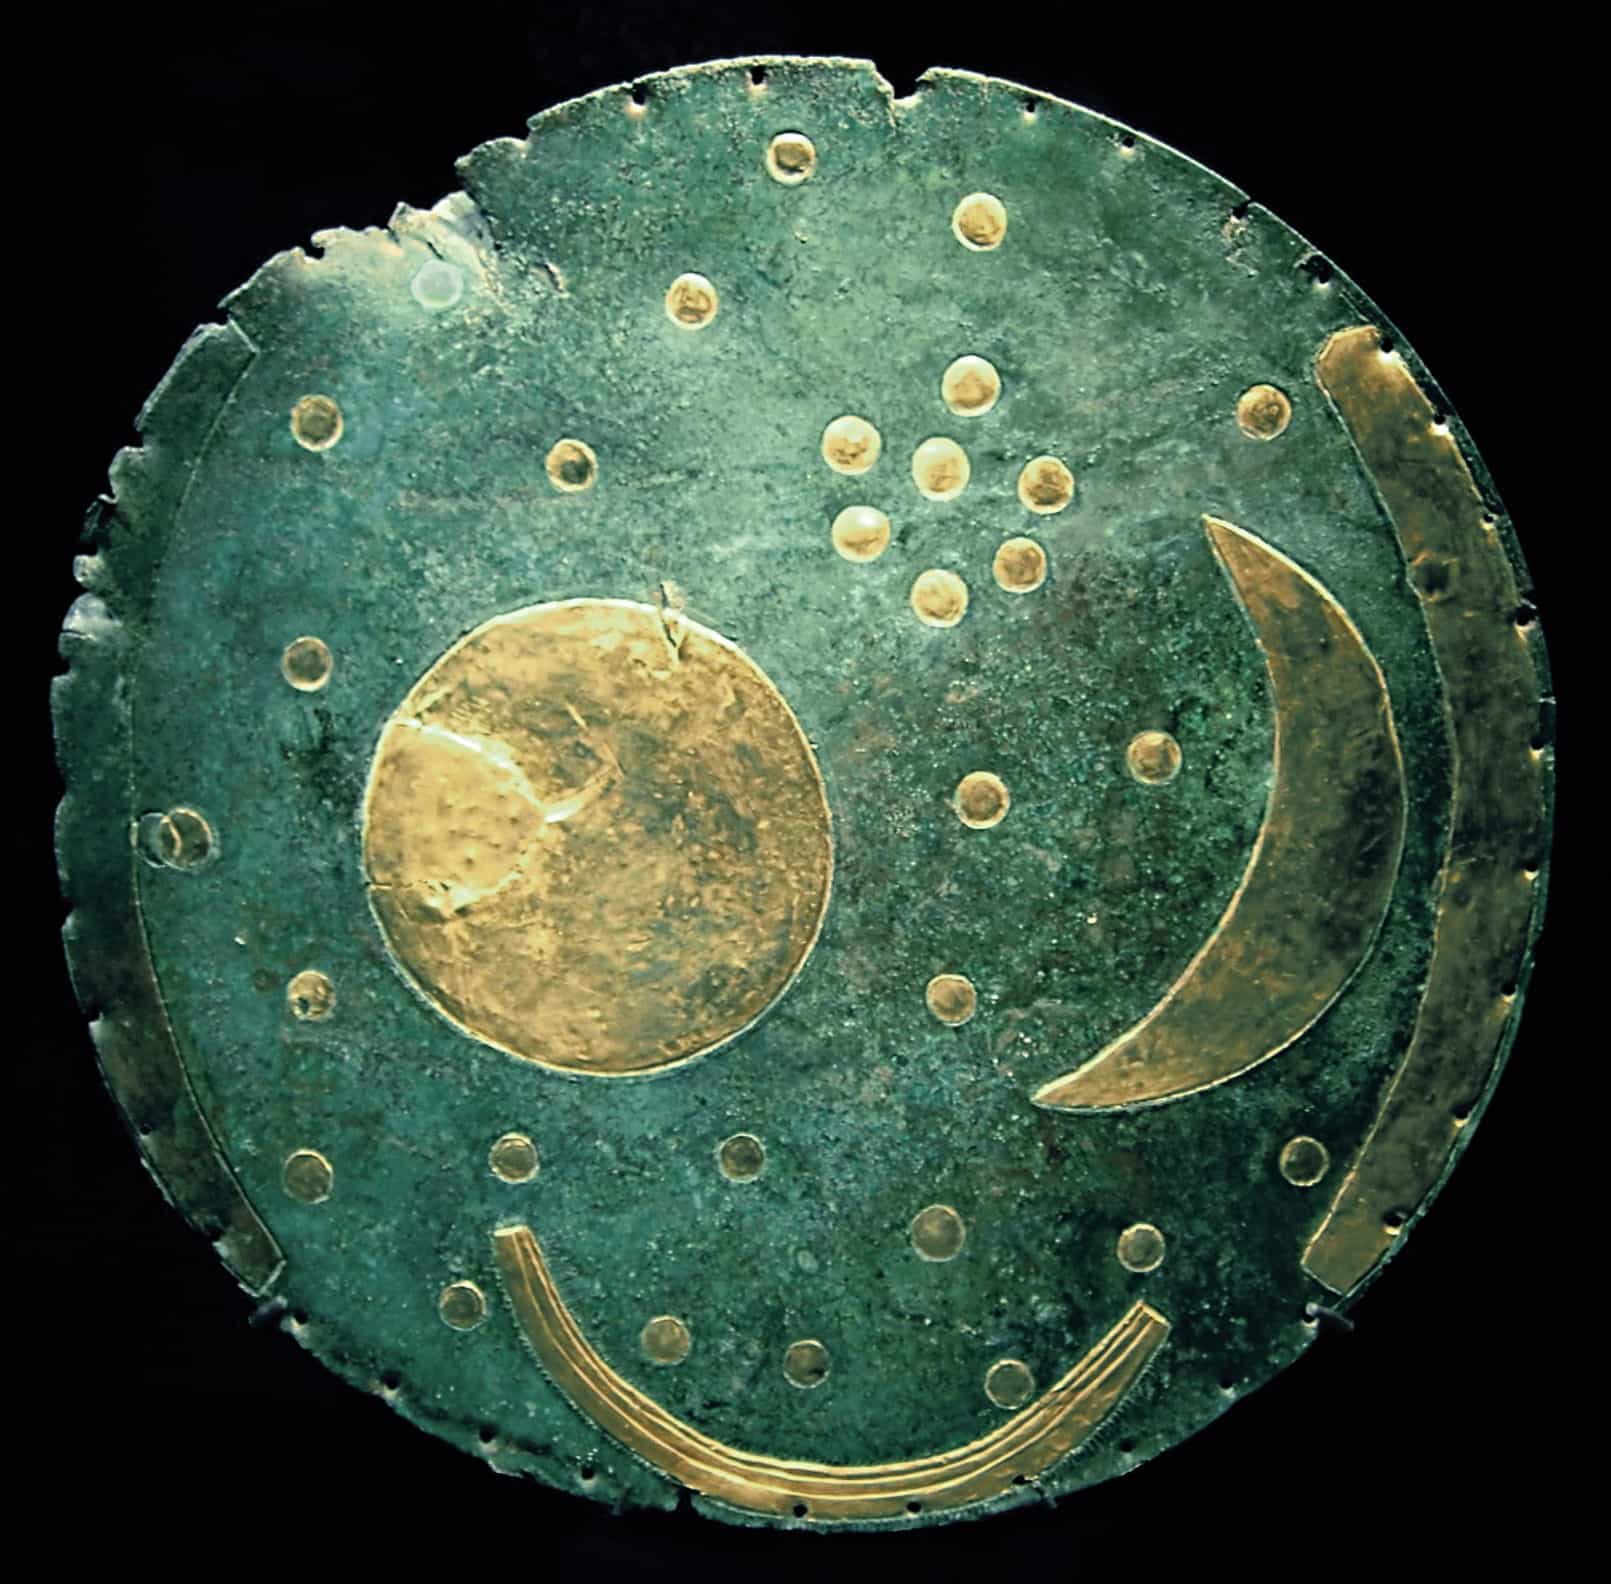 NebraScheibe - The Nebra Sky Disc: One Of The Oldest Cosmic Maps Ever Discovered